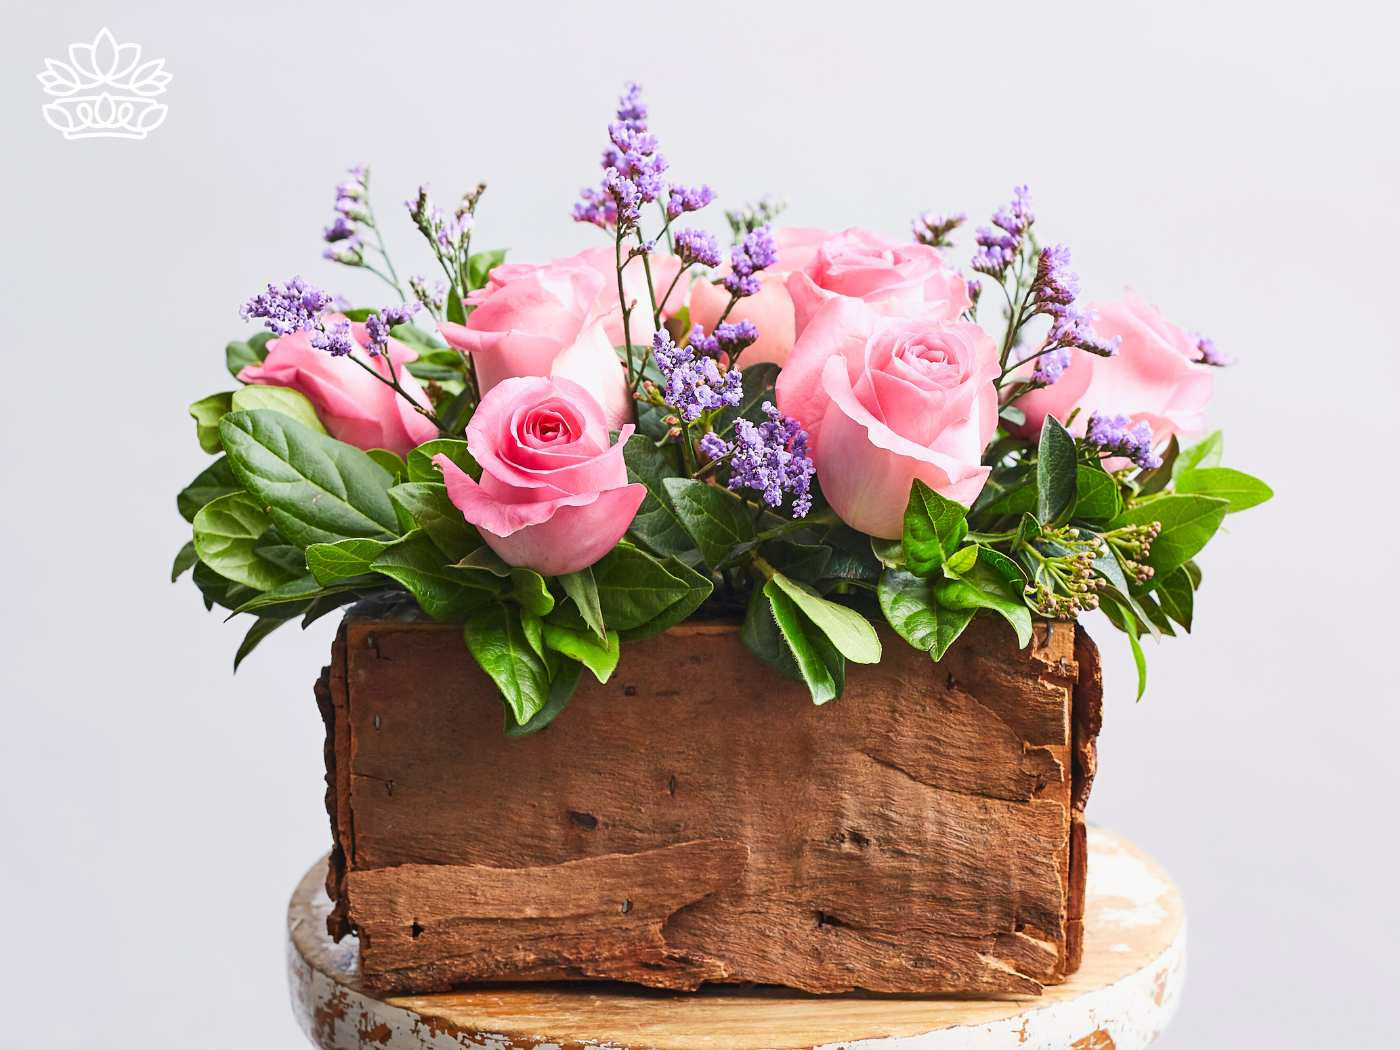 A rustic wooden box overflows with lush greenery and an arrangement of delicate pink roses and lavender flowers, embodying thoughtful gifts and natural beauty. Fabulous Flowers and Gifts. Gifts for Her.